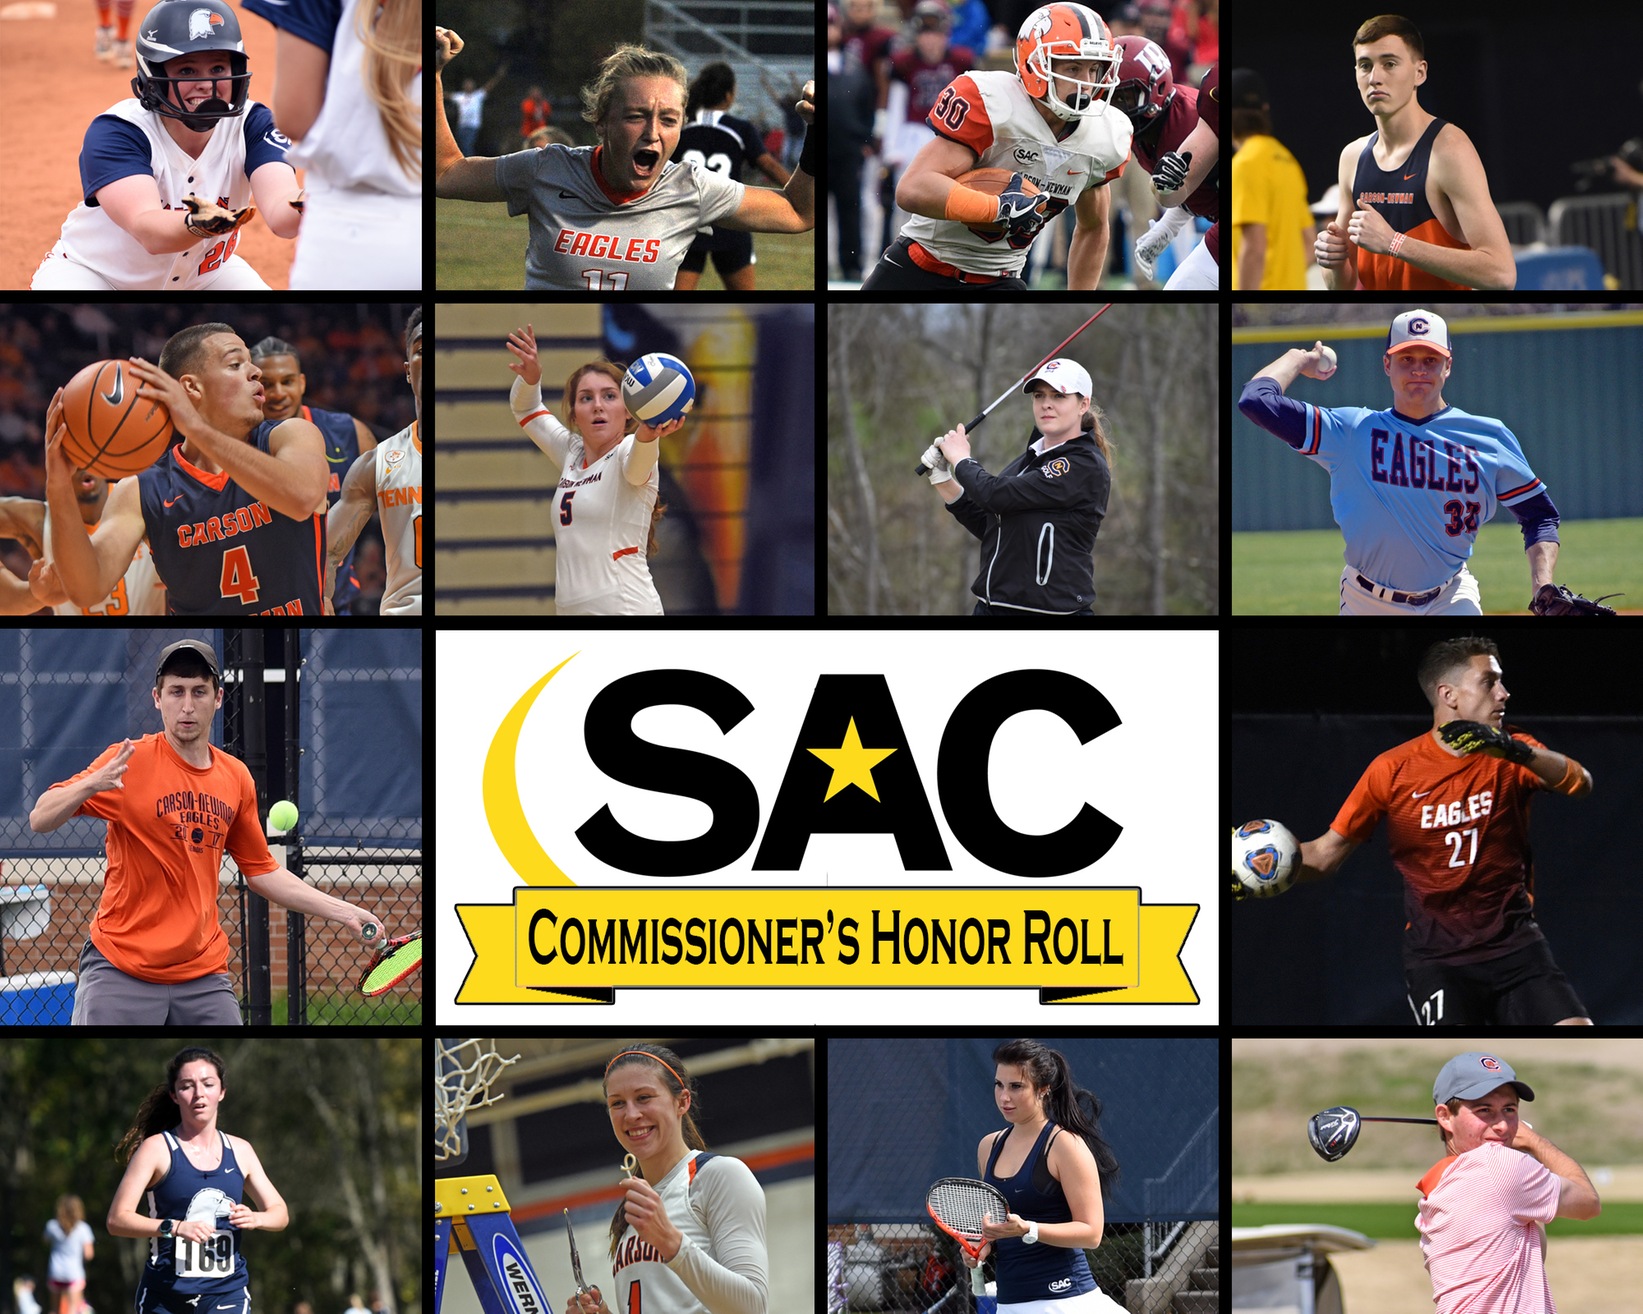 Record-setting number of student athletes named to SAC Commissioner's Honor Roll